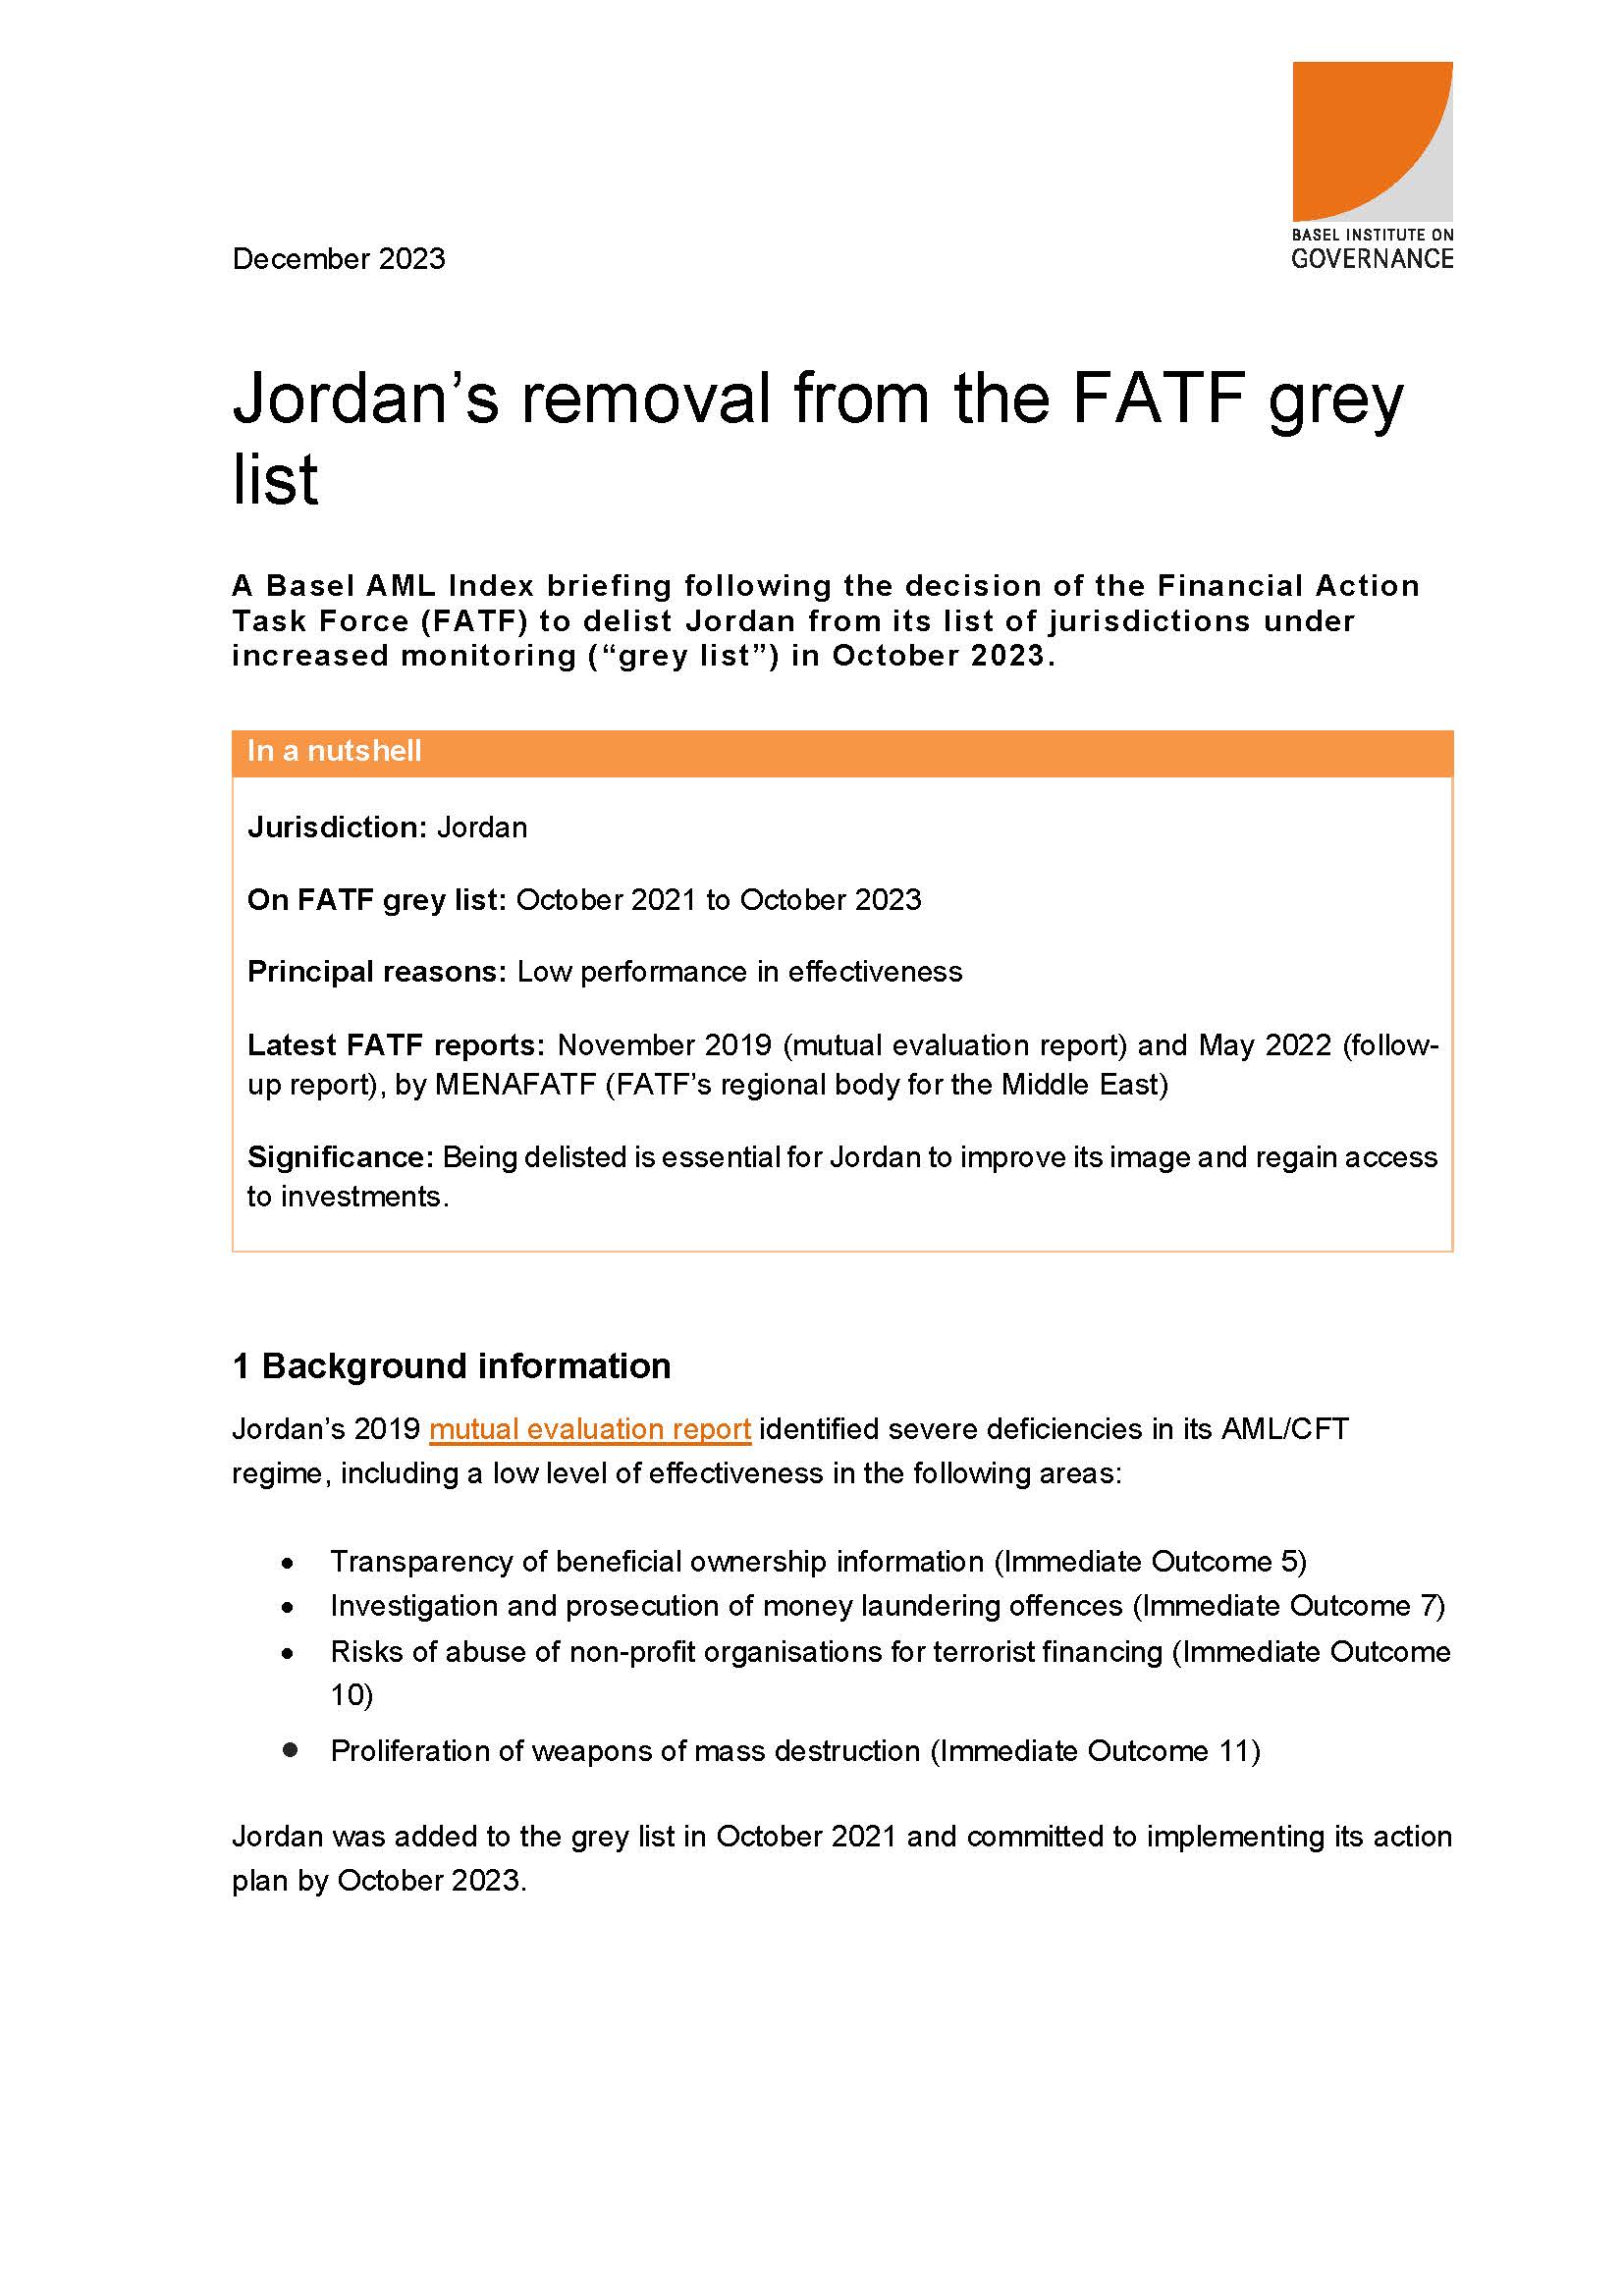 Report - Jordan's removal from the FATF grey list.jpg